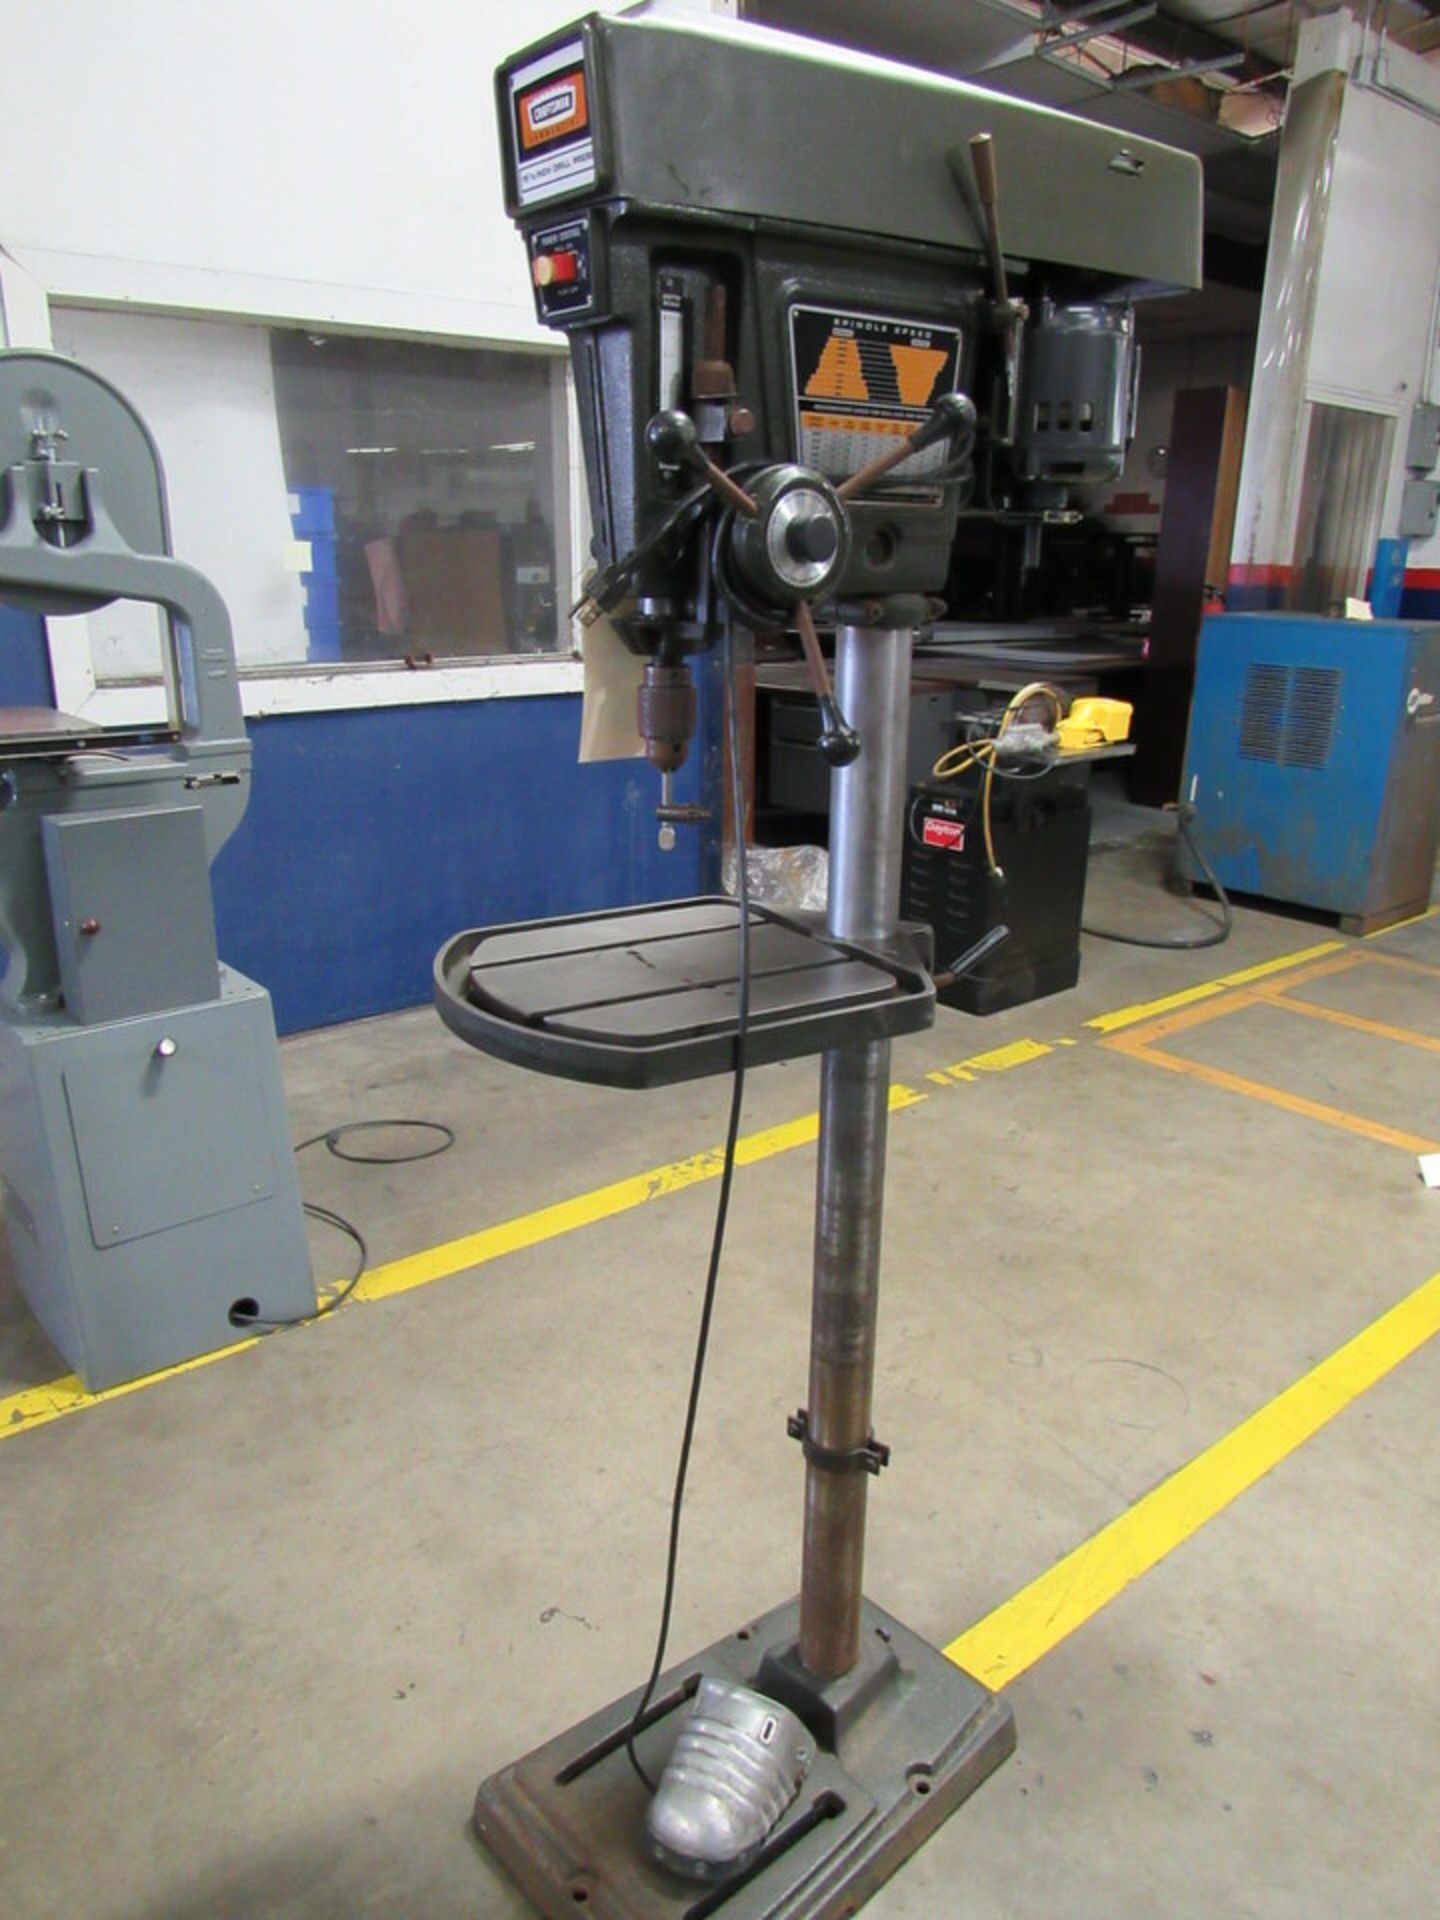 Craftsman Commercial 15-1/2" Floor Drill Press - Image 5 of 7